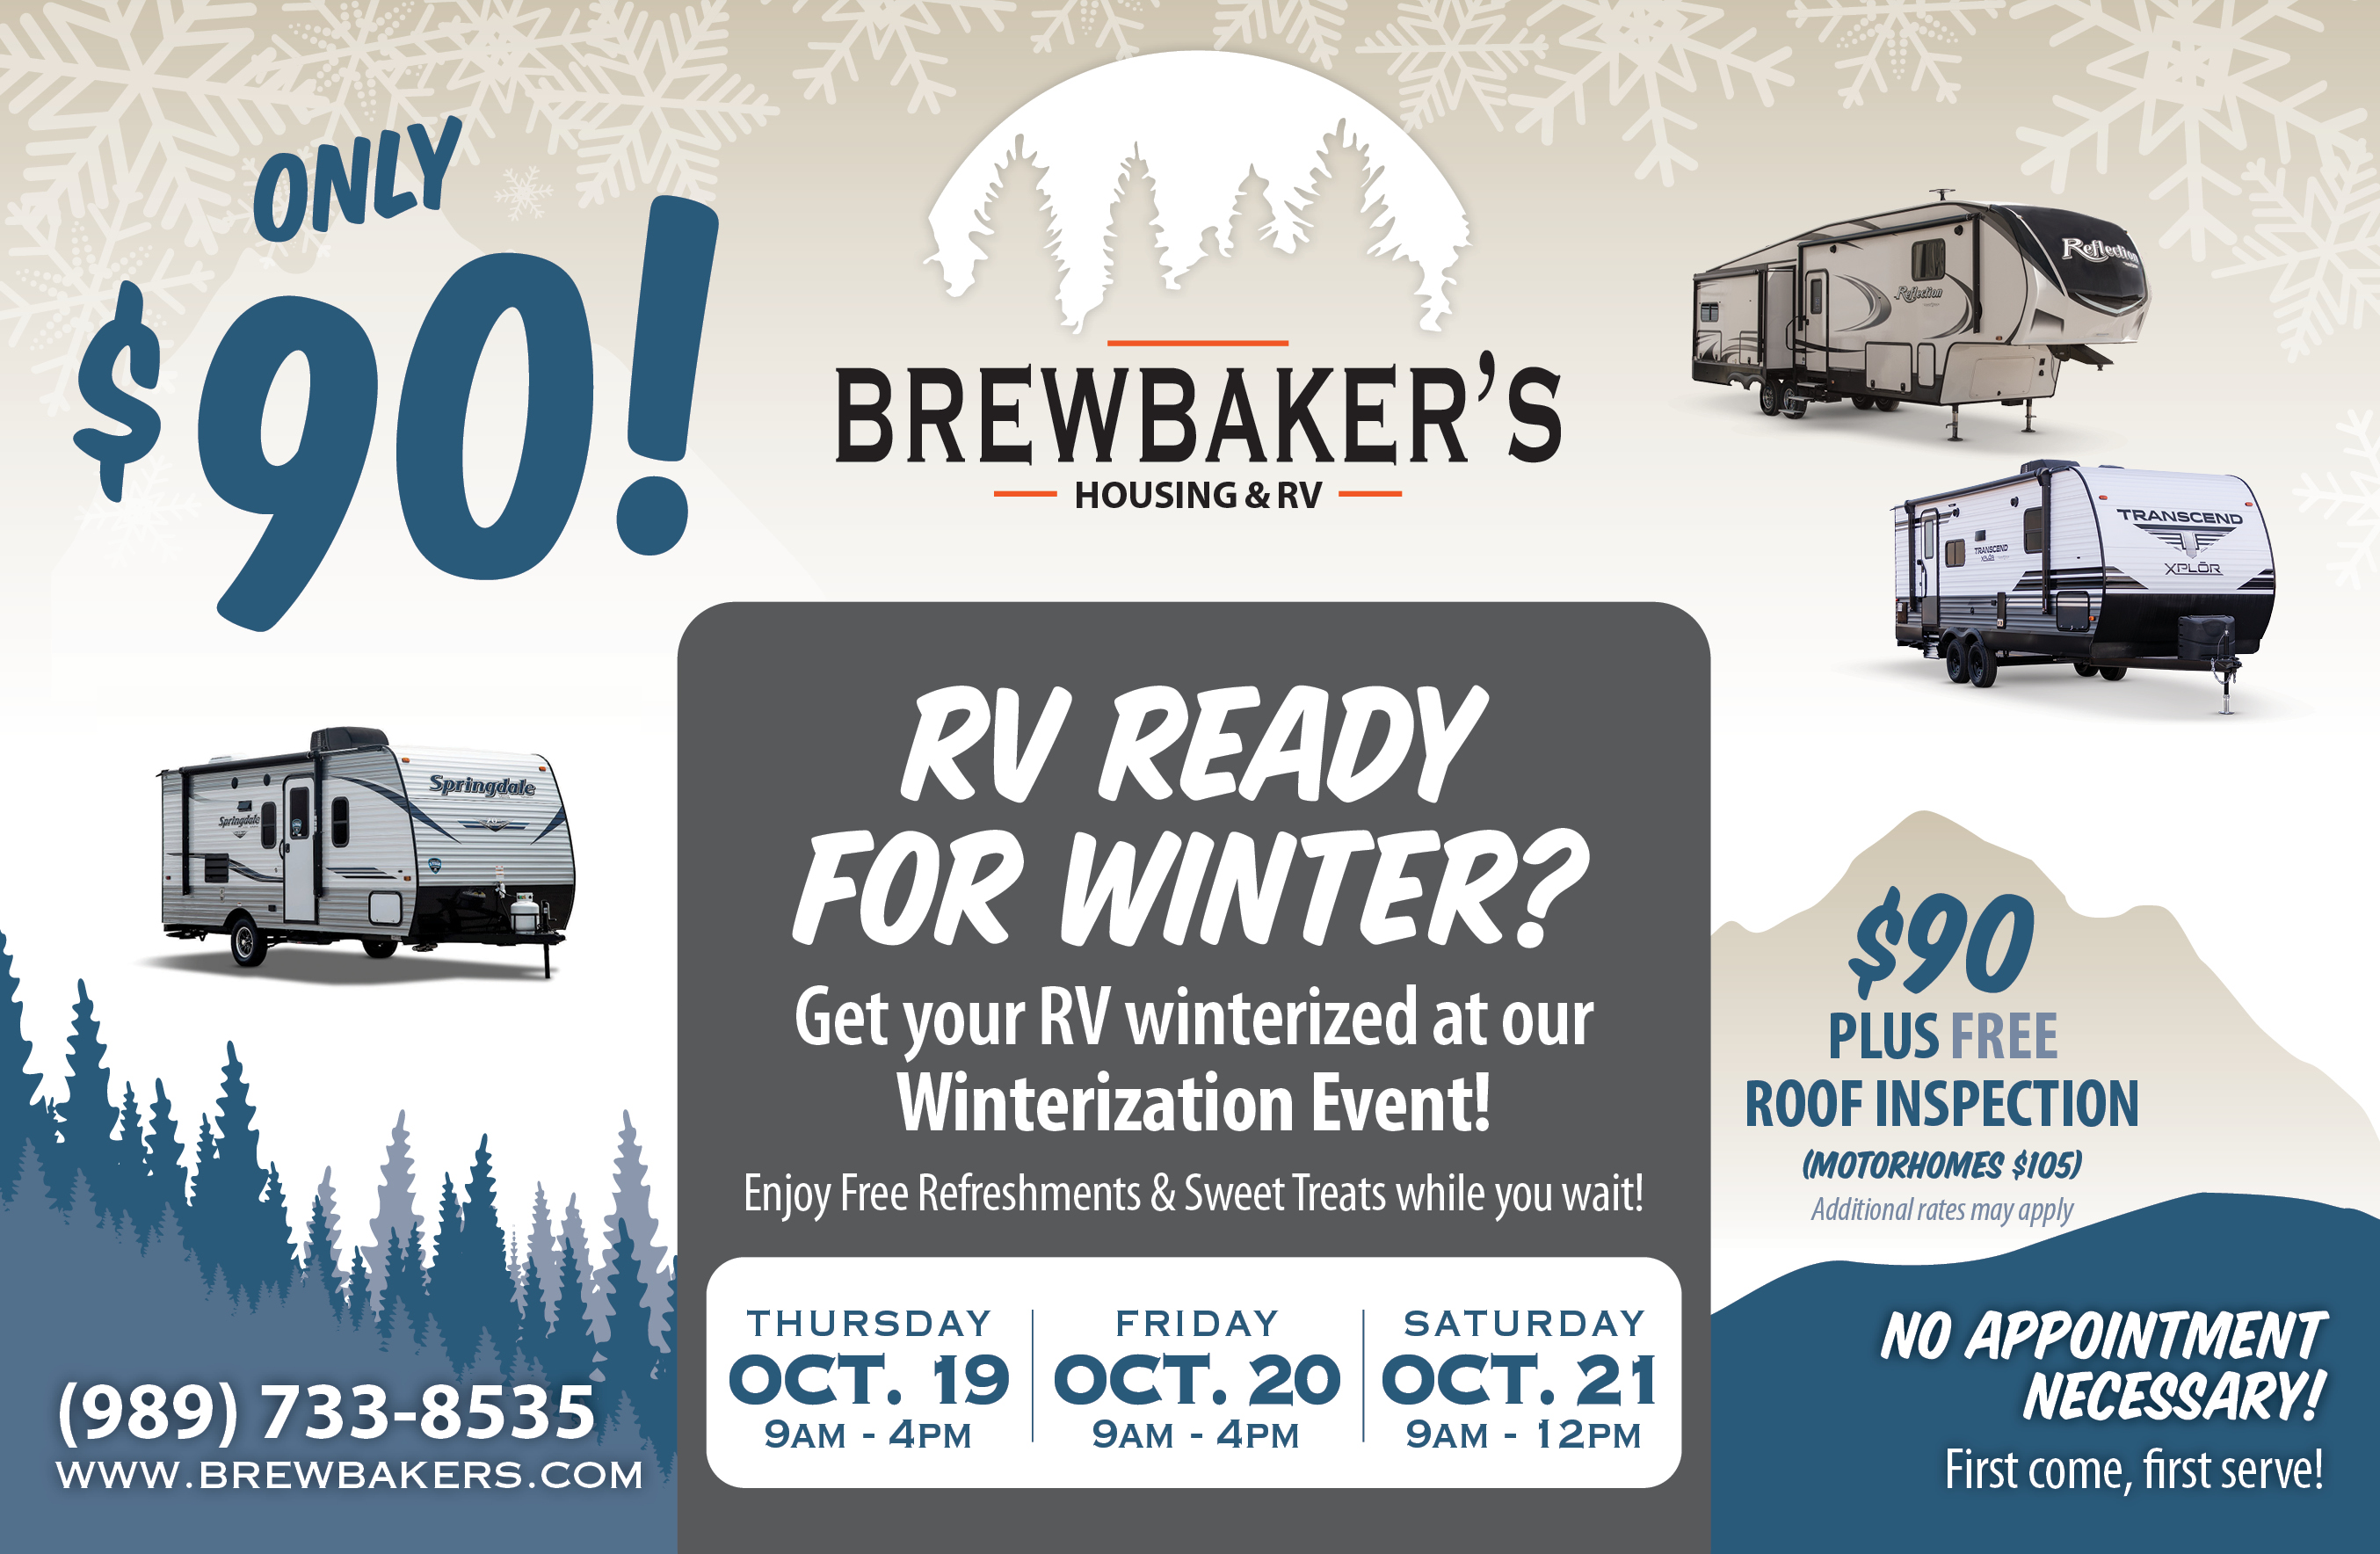 Get your RV winterized at our Winterization Event: Thursday Oct 19. 9am - 4pm; Friday Oct 20 9am - 4pm; Saturday Oct 21 9am-12pm; Only $90 Plus Free Roof Inspection. (Motorhomes $105) Additional rates may apply. No Appointment Necessary! First come, first serve! Enjoy refreshments and sweet treats while you wait.